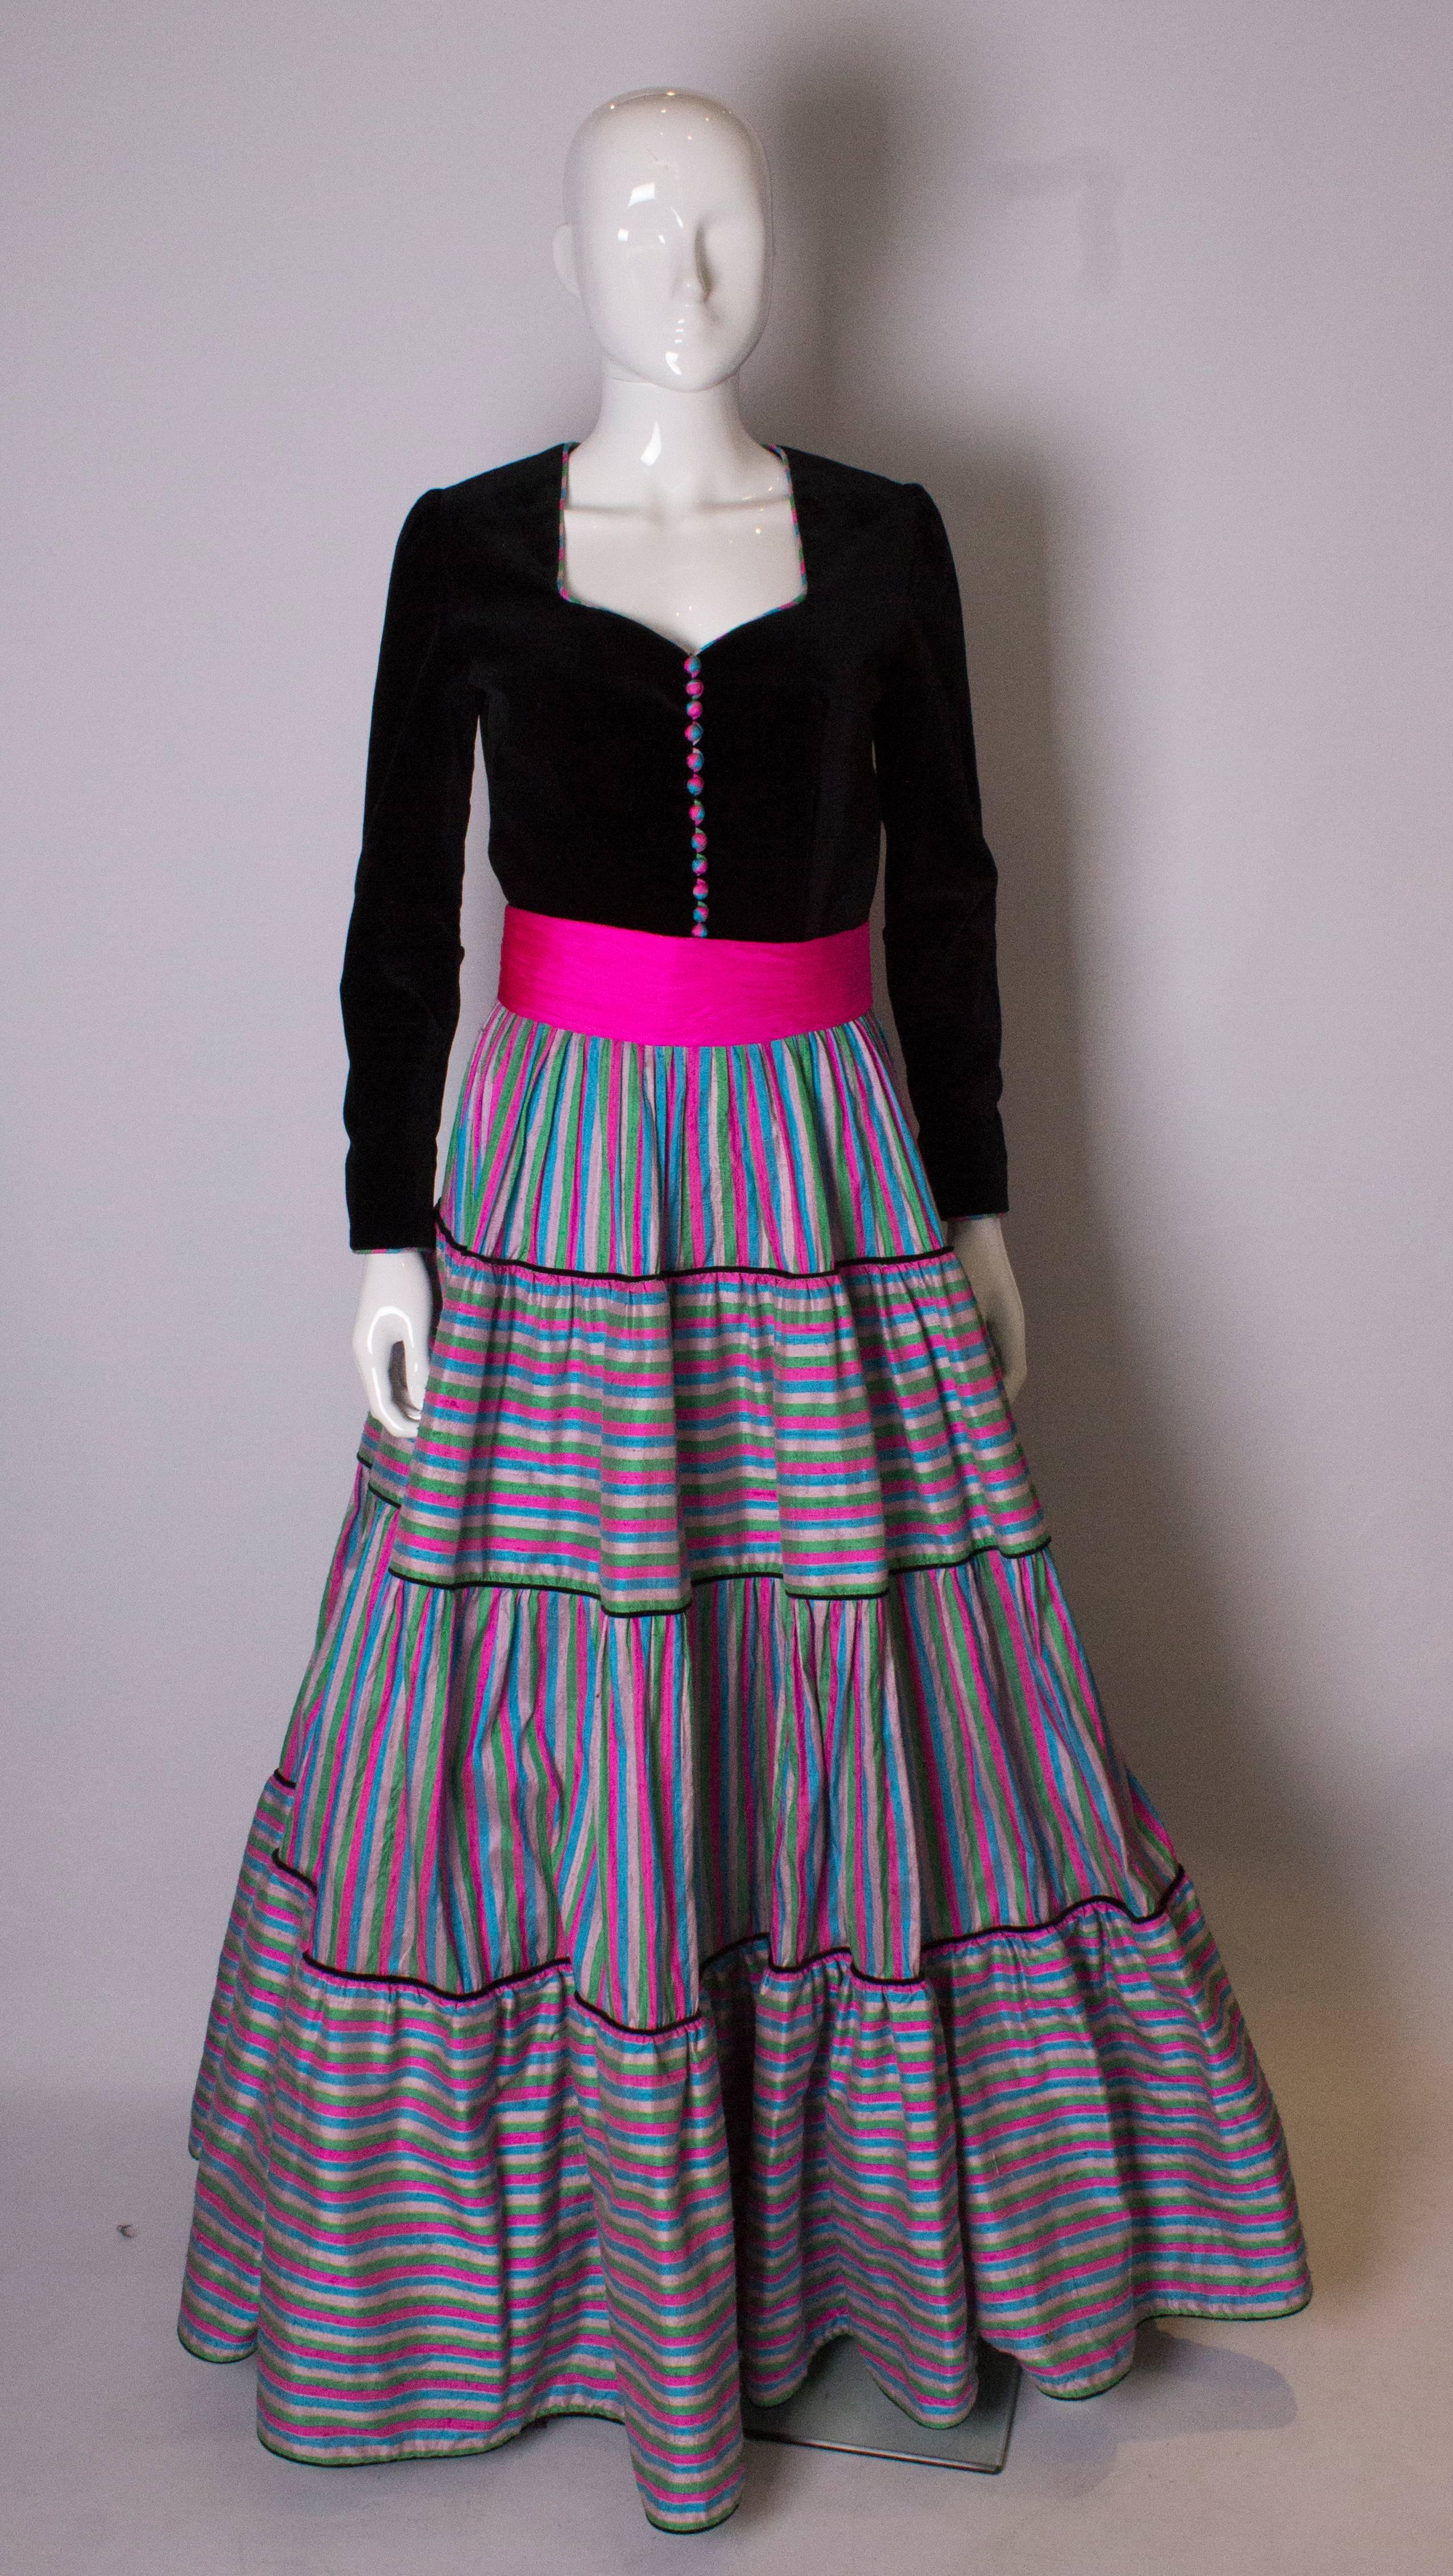 A great vintage gown by Regamus London. The gown has a black velvet top half with a sweetheart neckline. It has a full skirt, with silk tiers of horizontal and vertical stripe silk. It has a net underskirt which is edged in coloured silk, and a